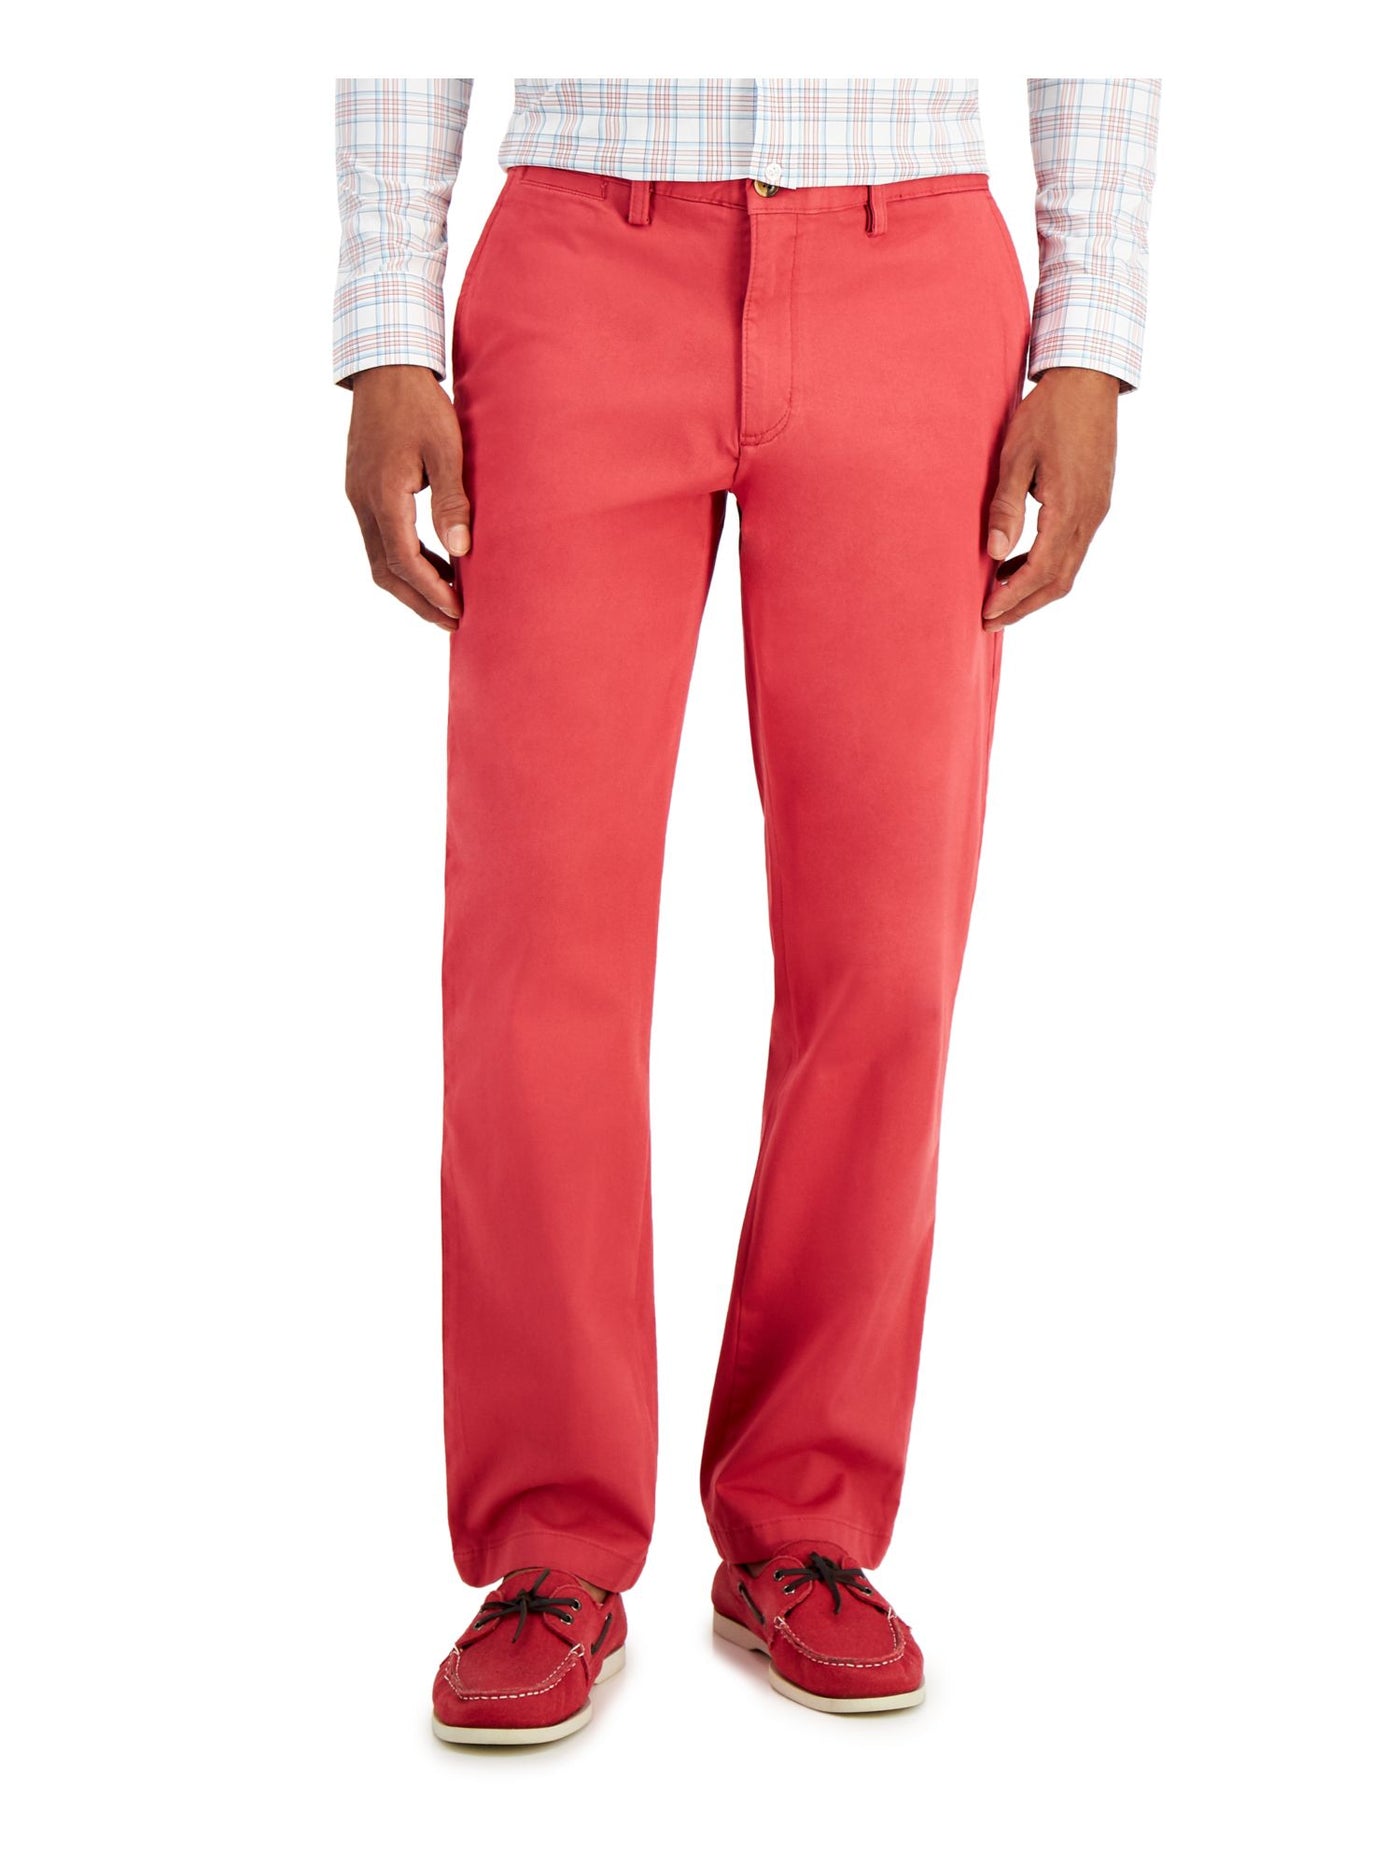 CLUBROOM Mens Red Classic Fit Stretch Chino Pants W34/ L32